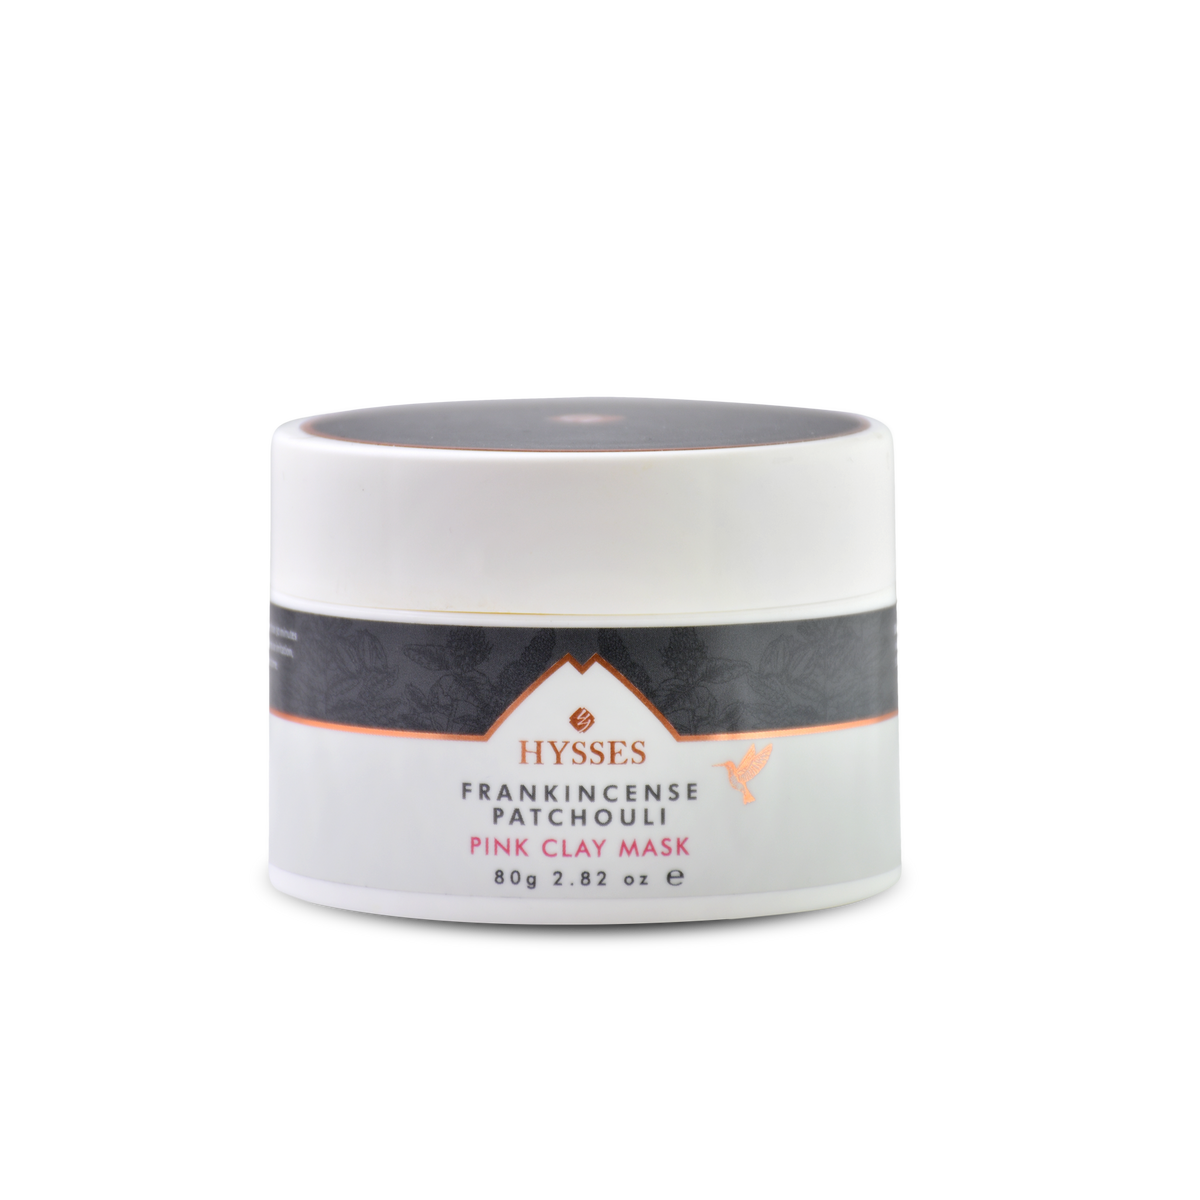 Pink Clay Mask Frankincense Patchouli